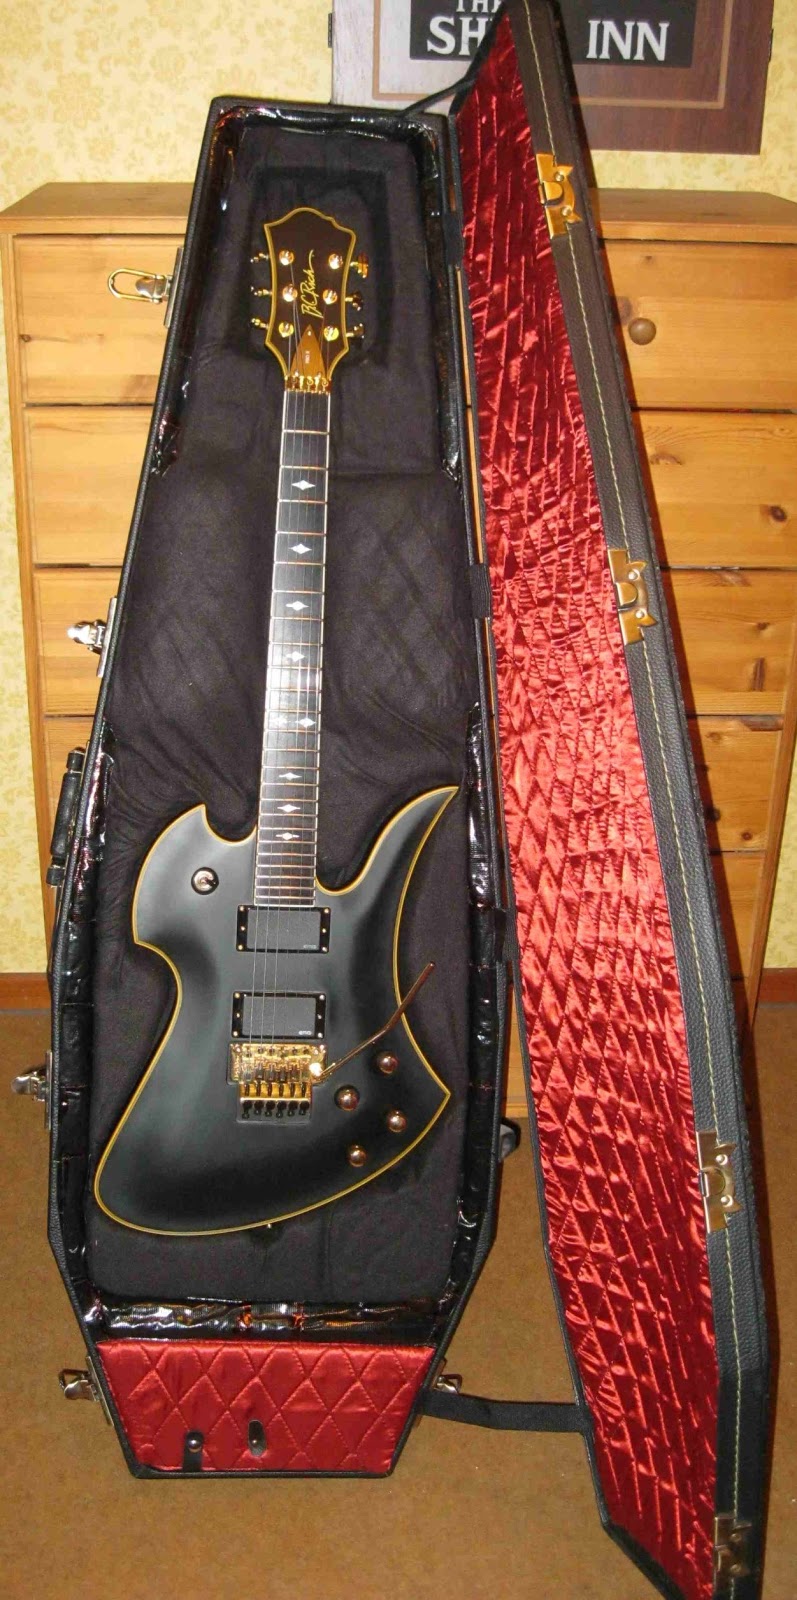 How can i tell what year my bc rich was made in?